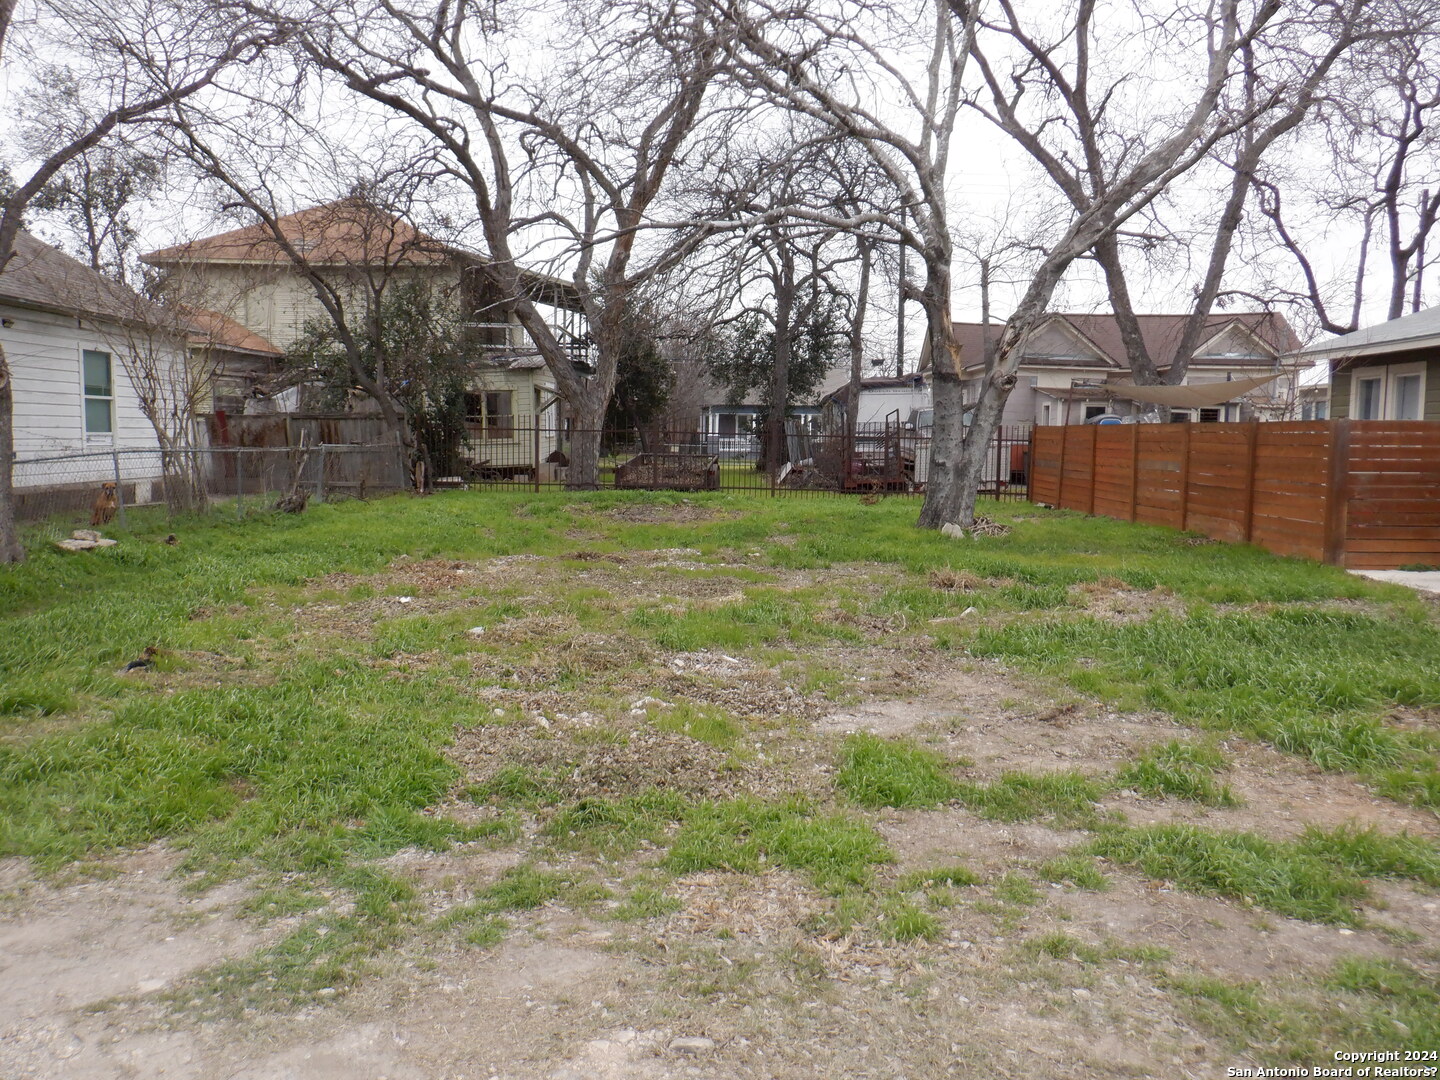 a view of a yard with a house